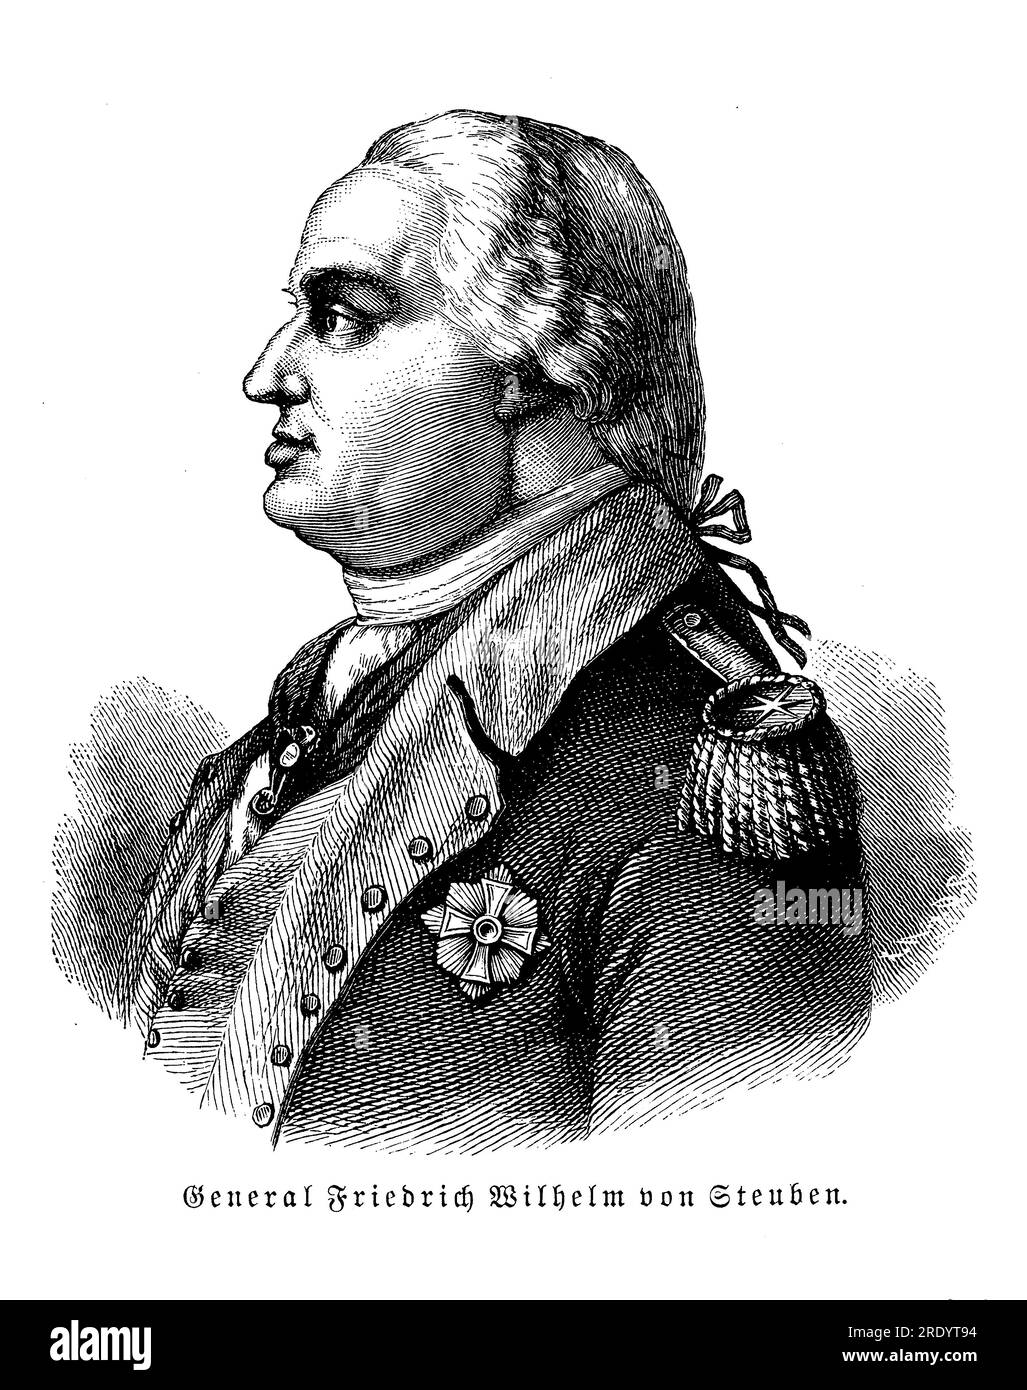 General Friedrich Wilhelm von Steuben (1730-1794) was a Prussian military officer who played a crucial role in the American Revolutionary War as a drillmaster and inspector general for the Continental Army. Arriving in the American colonies in 1777, von Steuben brought extensive military experience and knowledge of European warfare tactics. Stock Photo